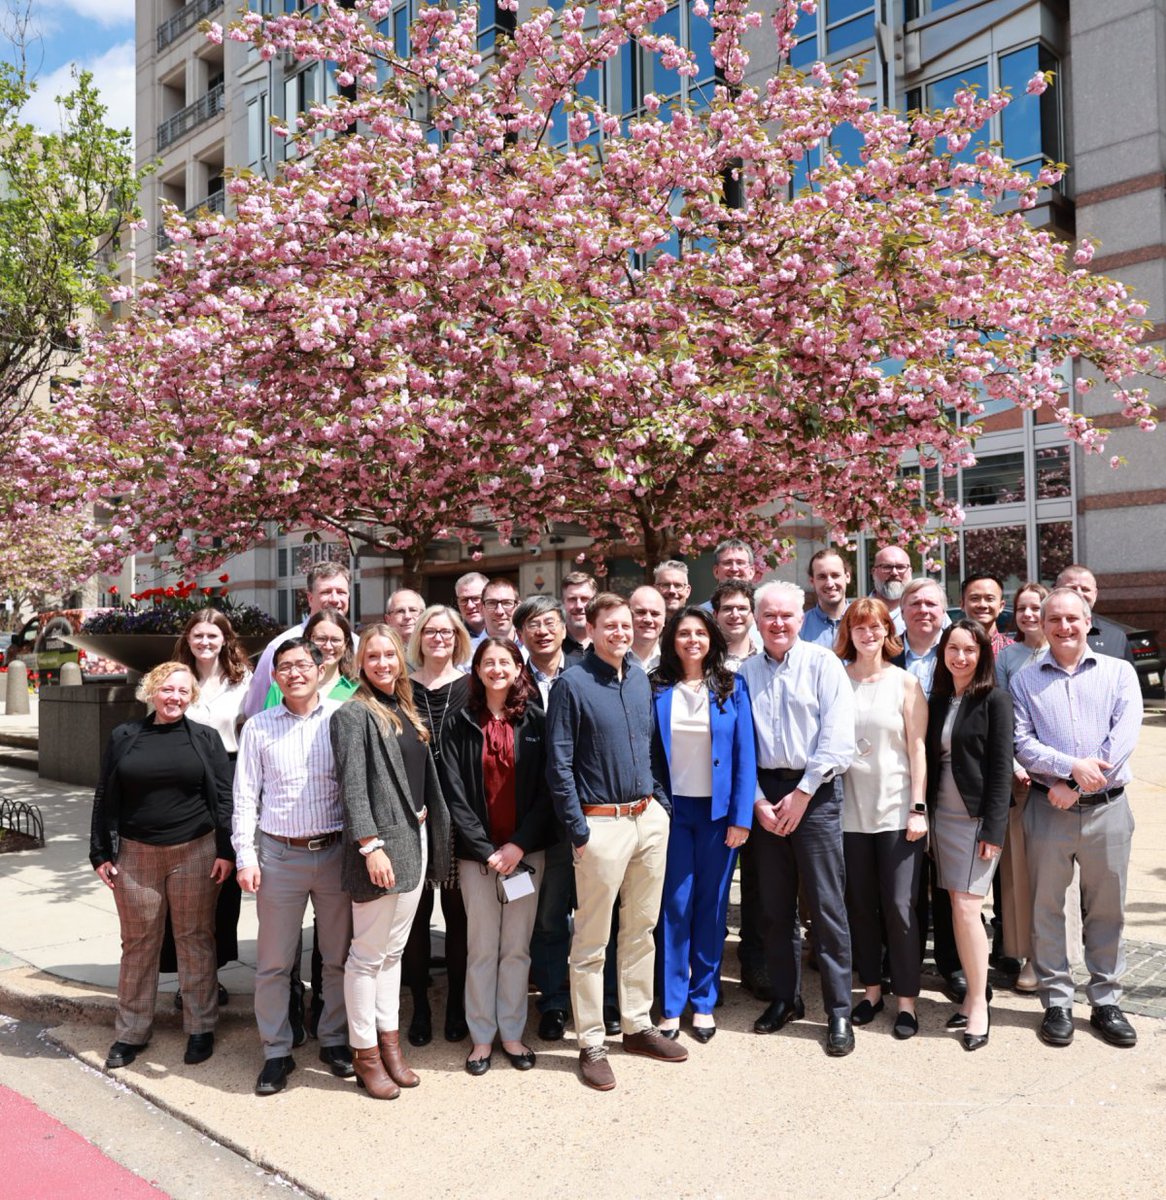 The ACS GCI was thrilled to host the GCI Pharmaceutical Roundtable meeting at the @AmerChemSociety Headquarters in Washington, D.C. last week! We look forward to our continued collaboration in advancing #GreenChemistry. Learn more about GCIPR initiatives: brnw.ch/21wIYOI